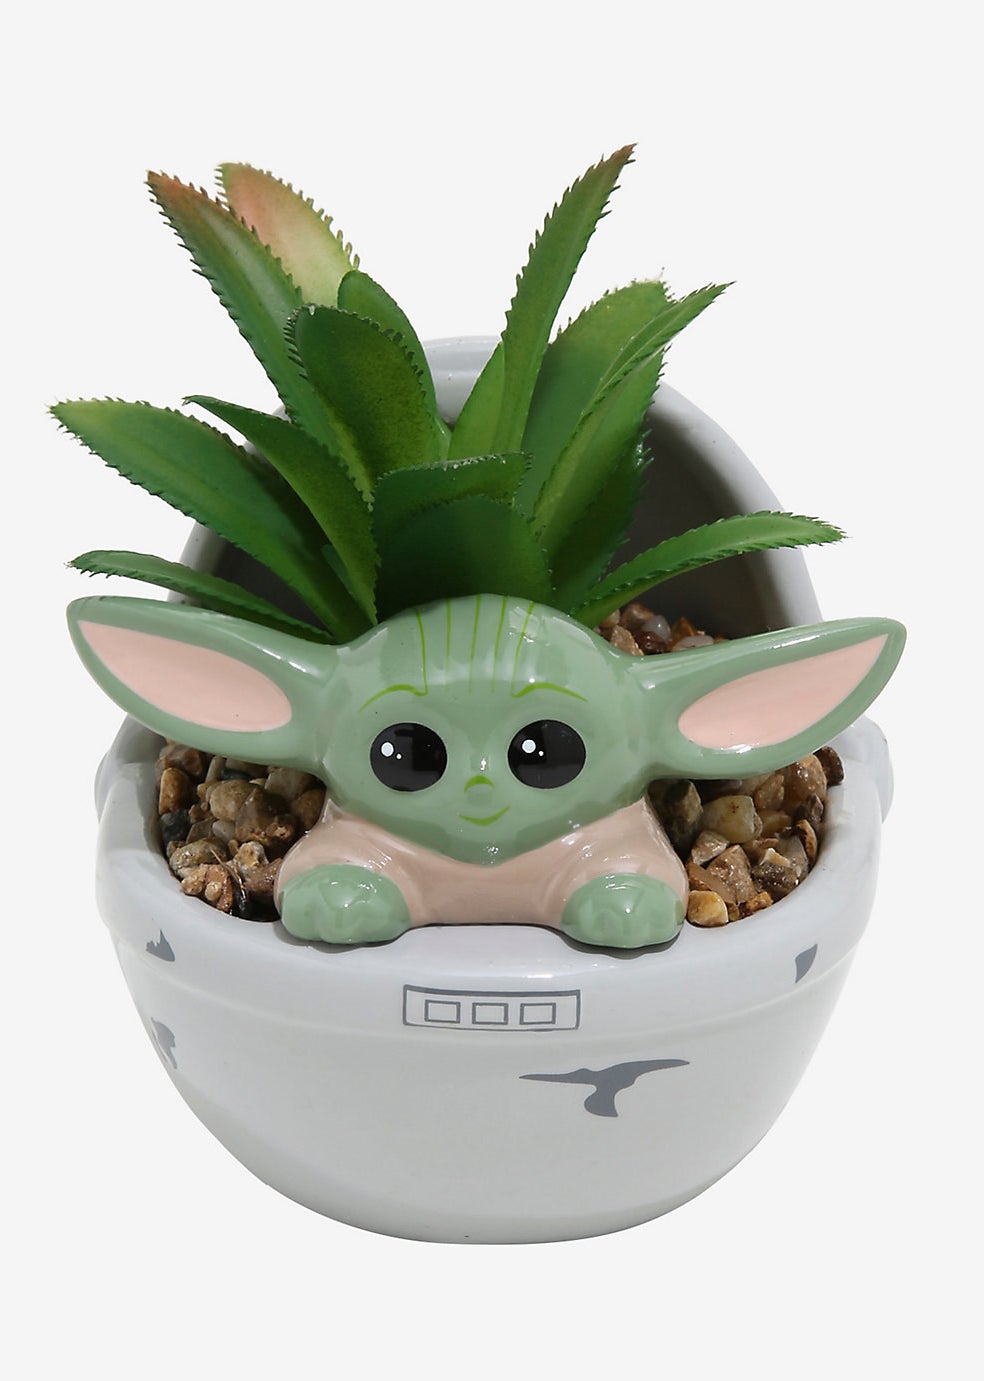 The Child themed planter with space for a small plant in the pram